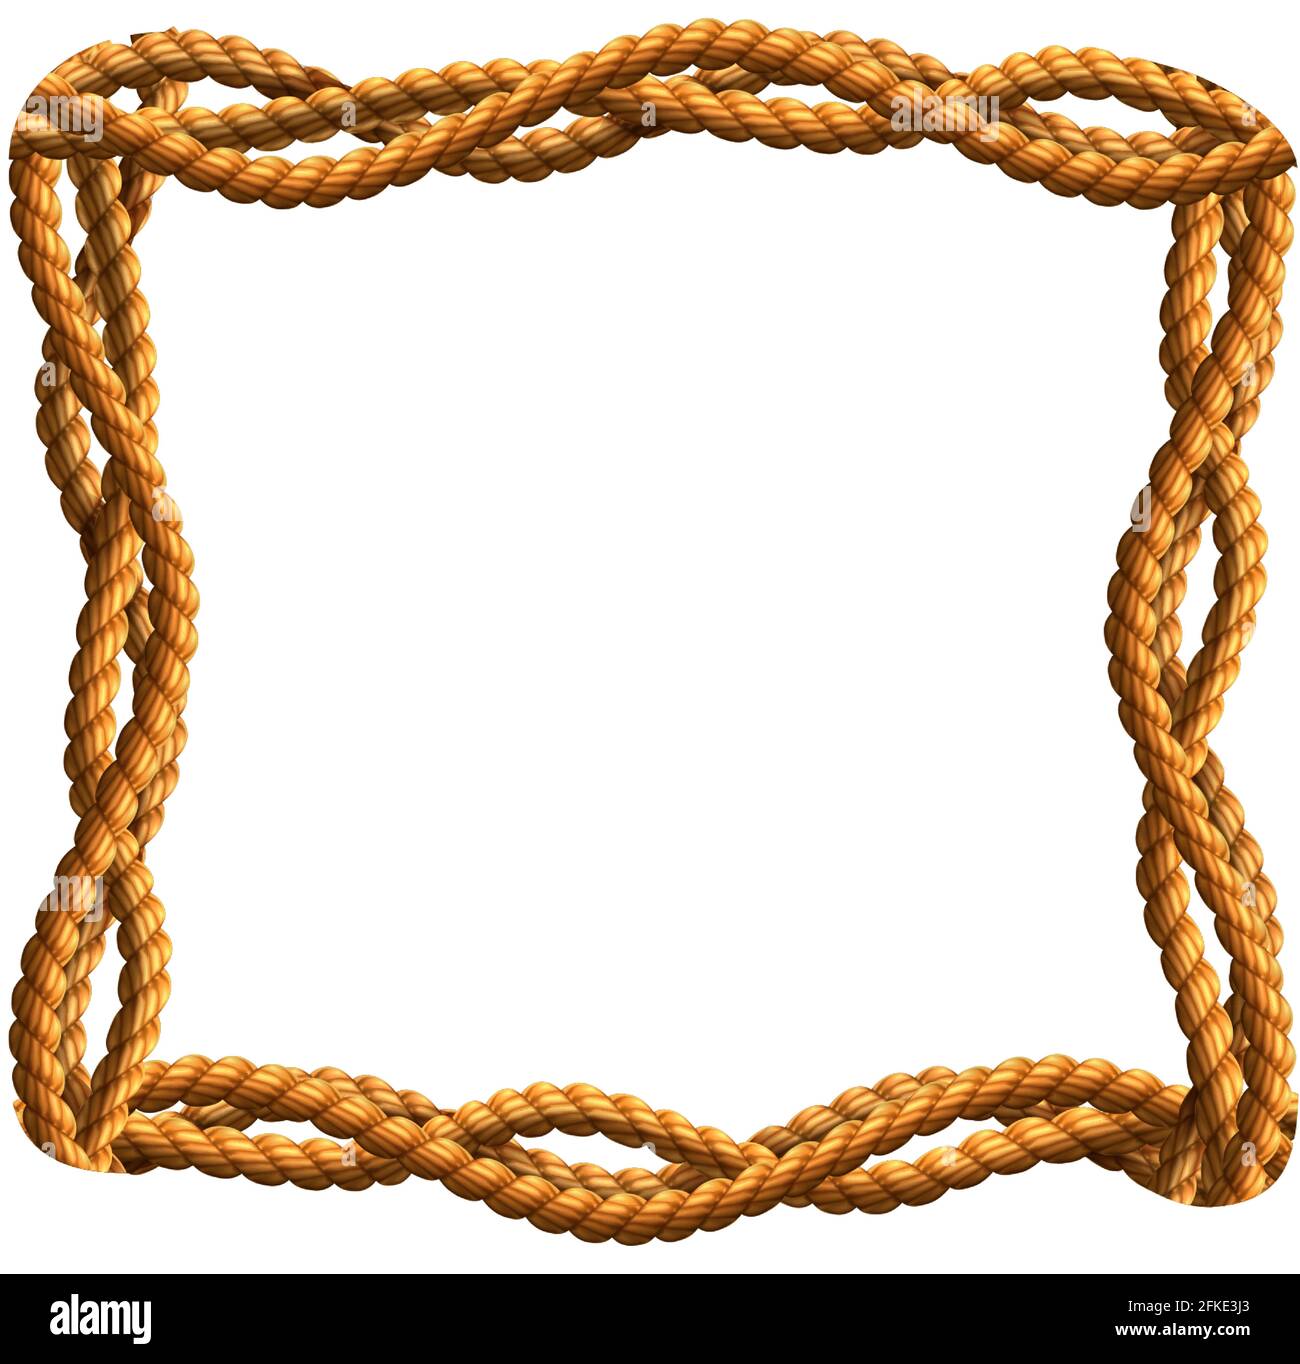 Vector realistic frame made of wavy ropes isolated. Stock Vector